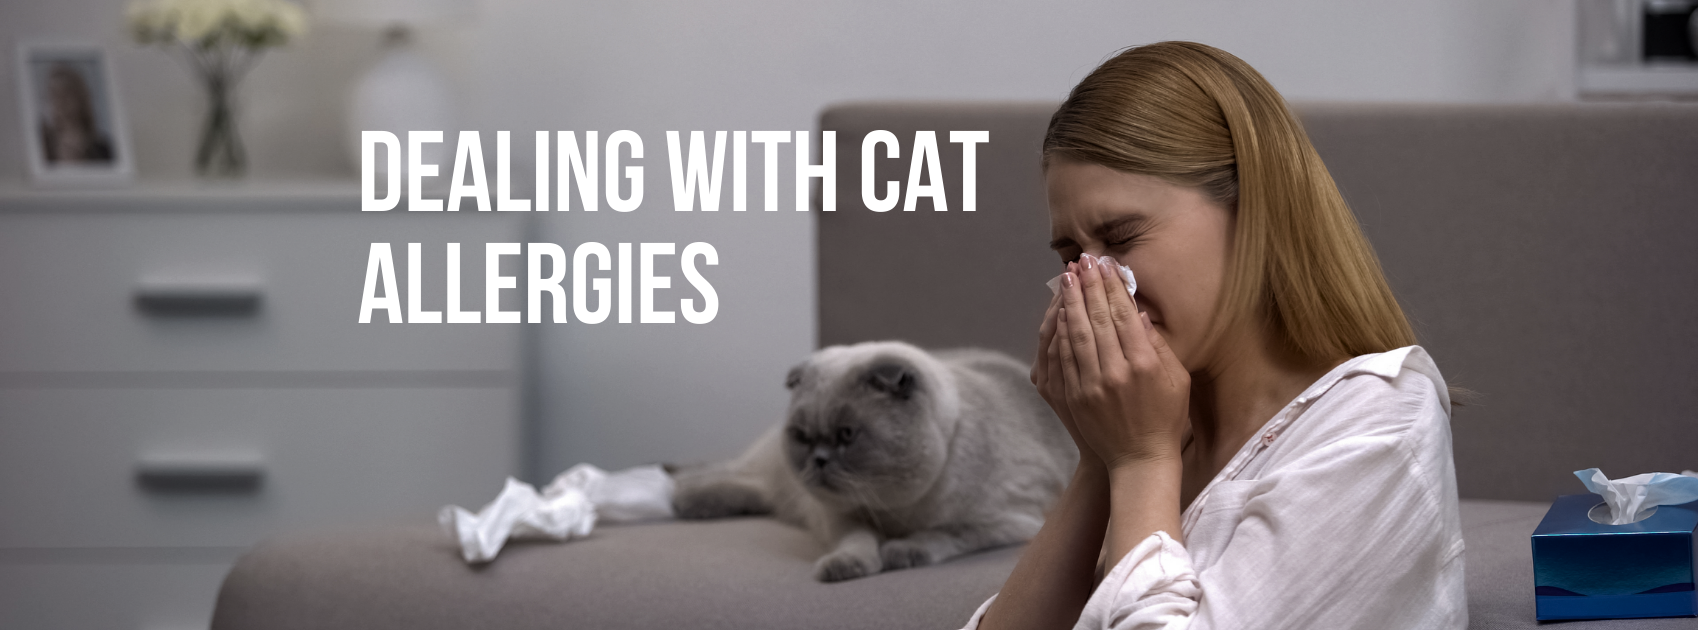 DEALING WITH CAT ALLERGIES